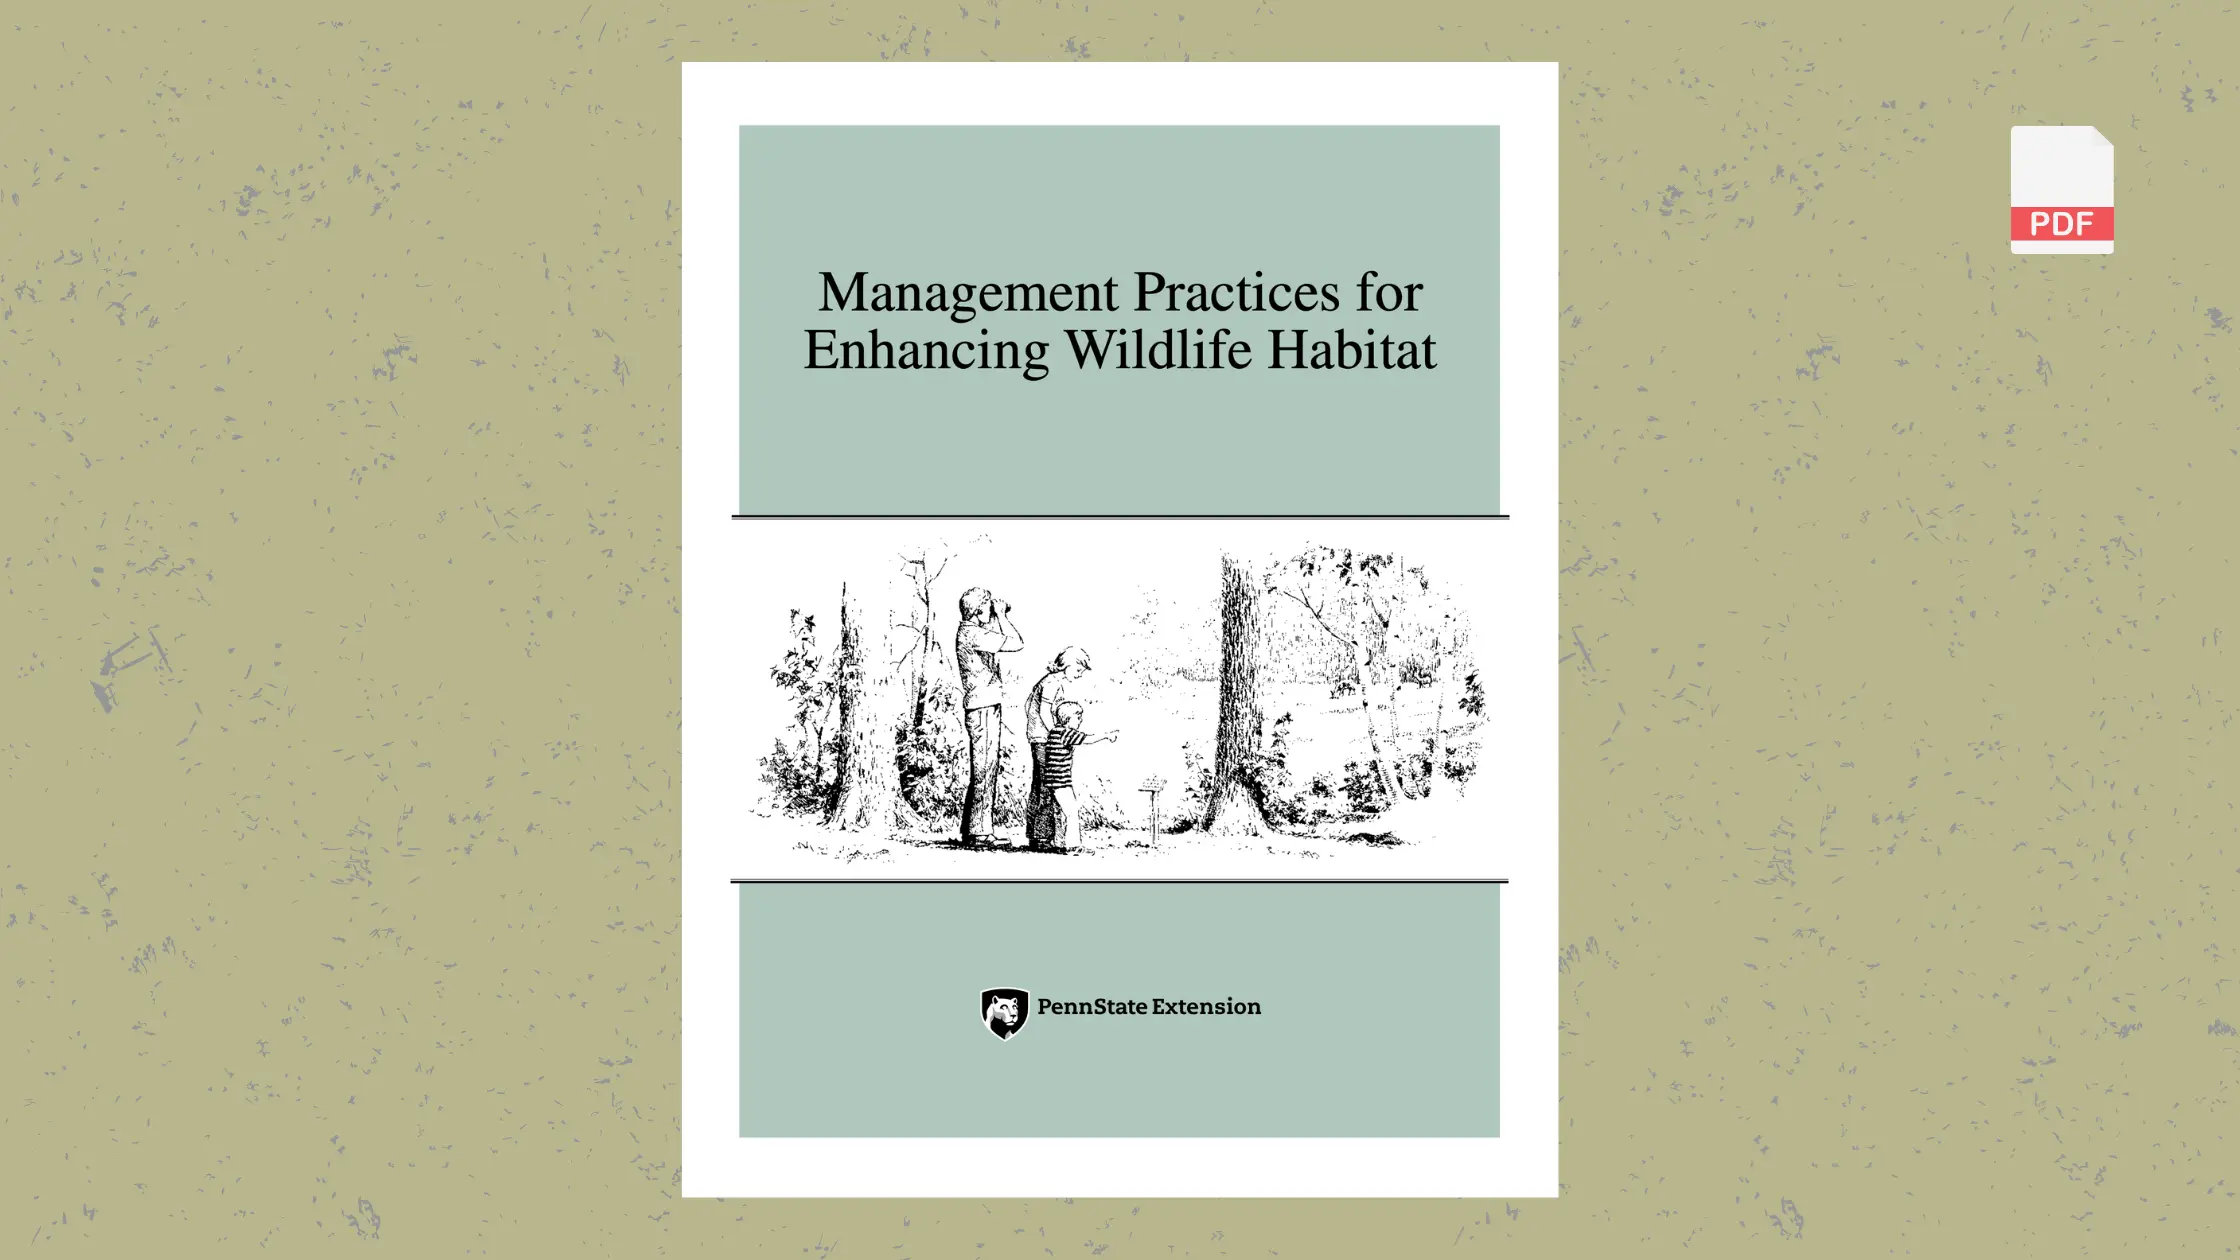 Management Practices for Enhancing Wildlife Habitat from PennState Extension